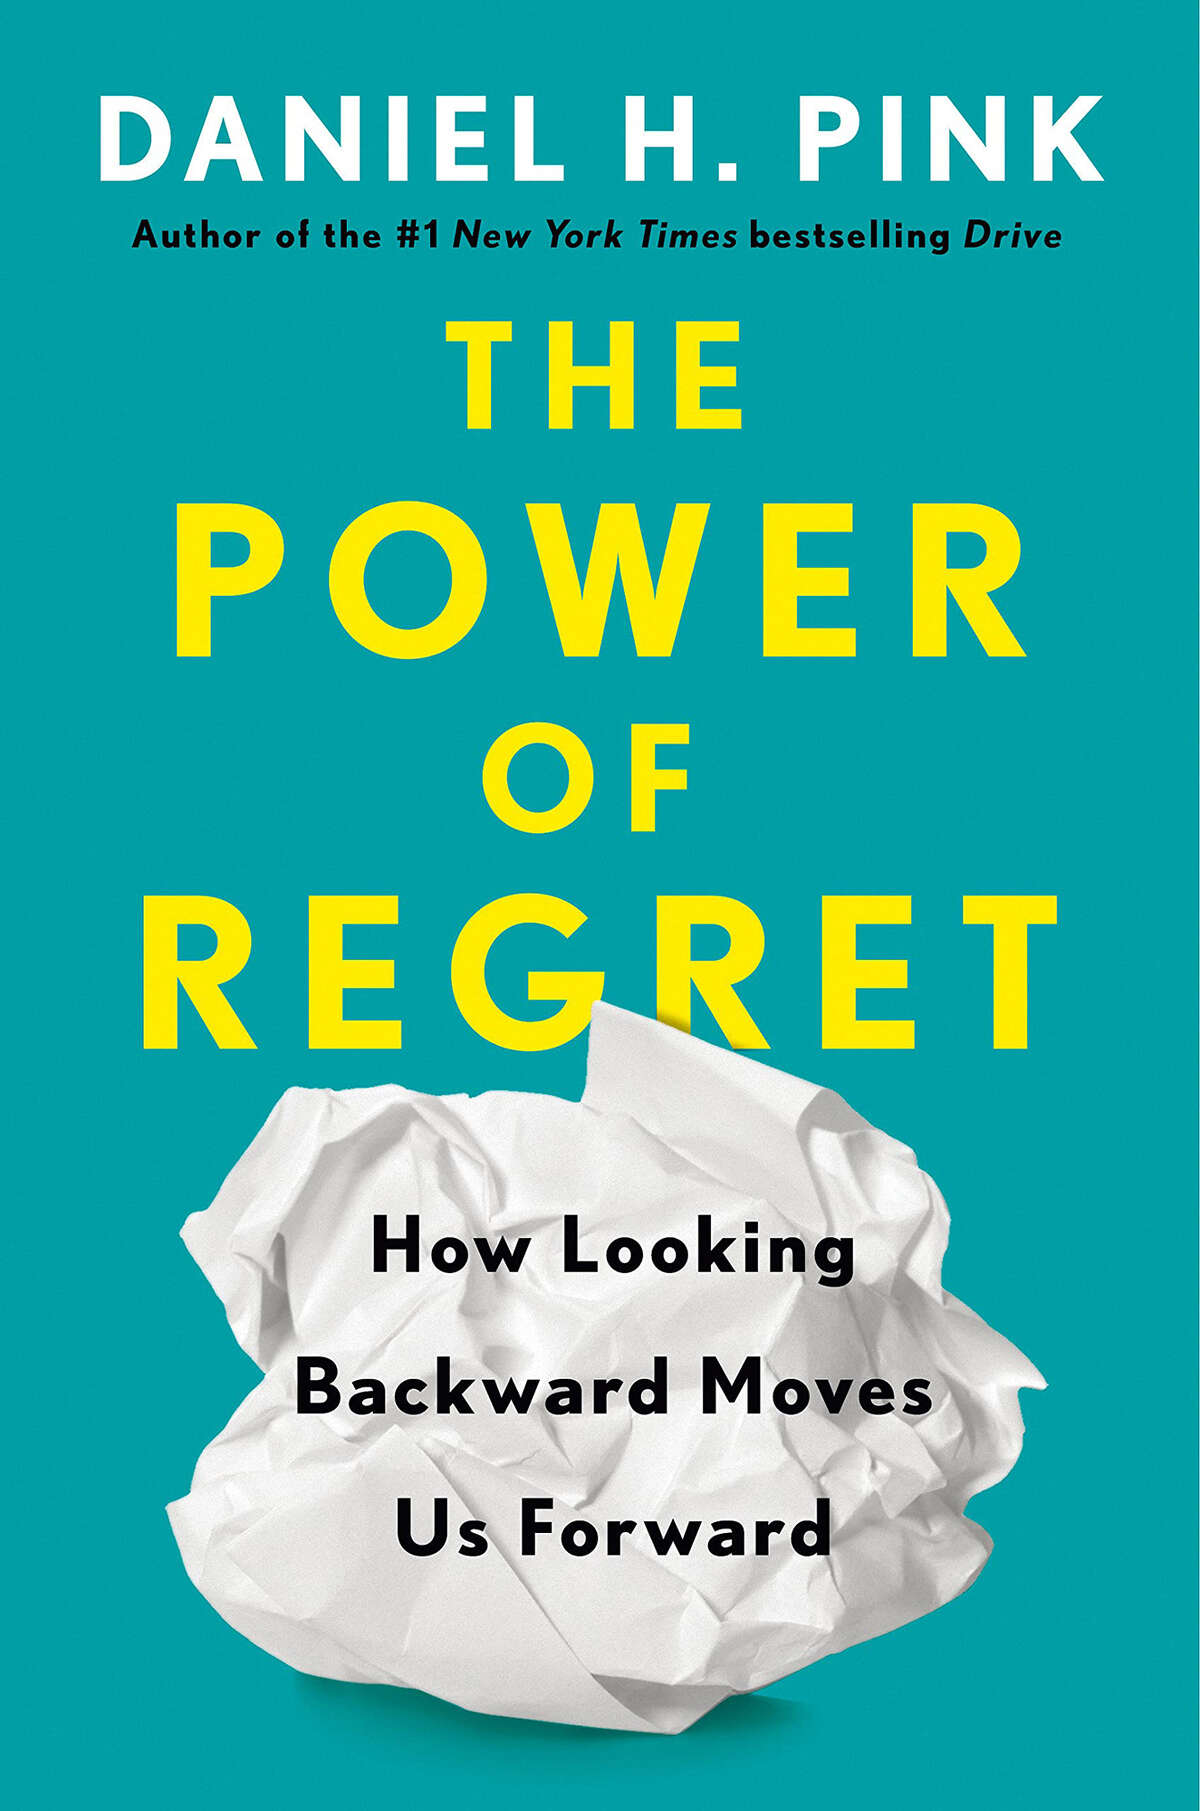 "The Power of Regret"